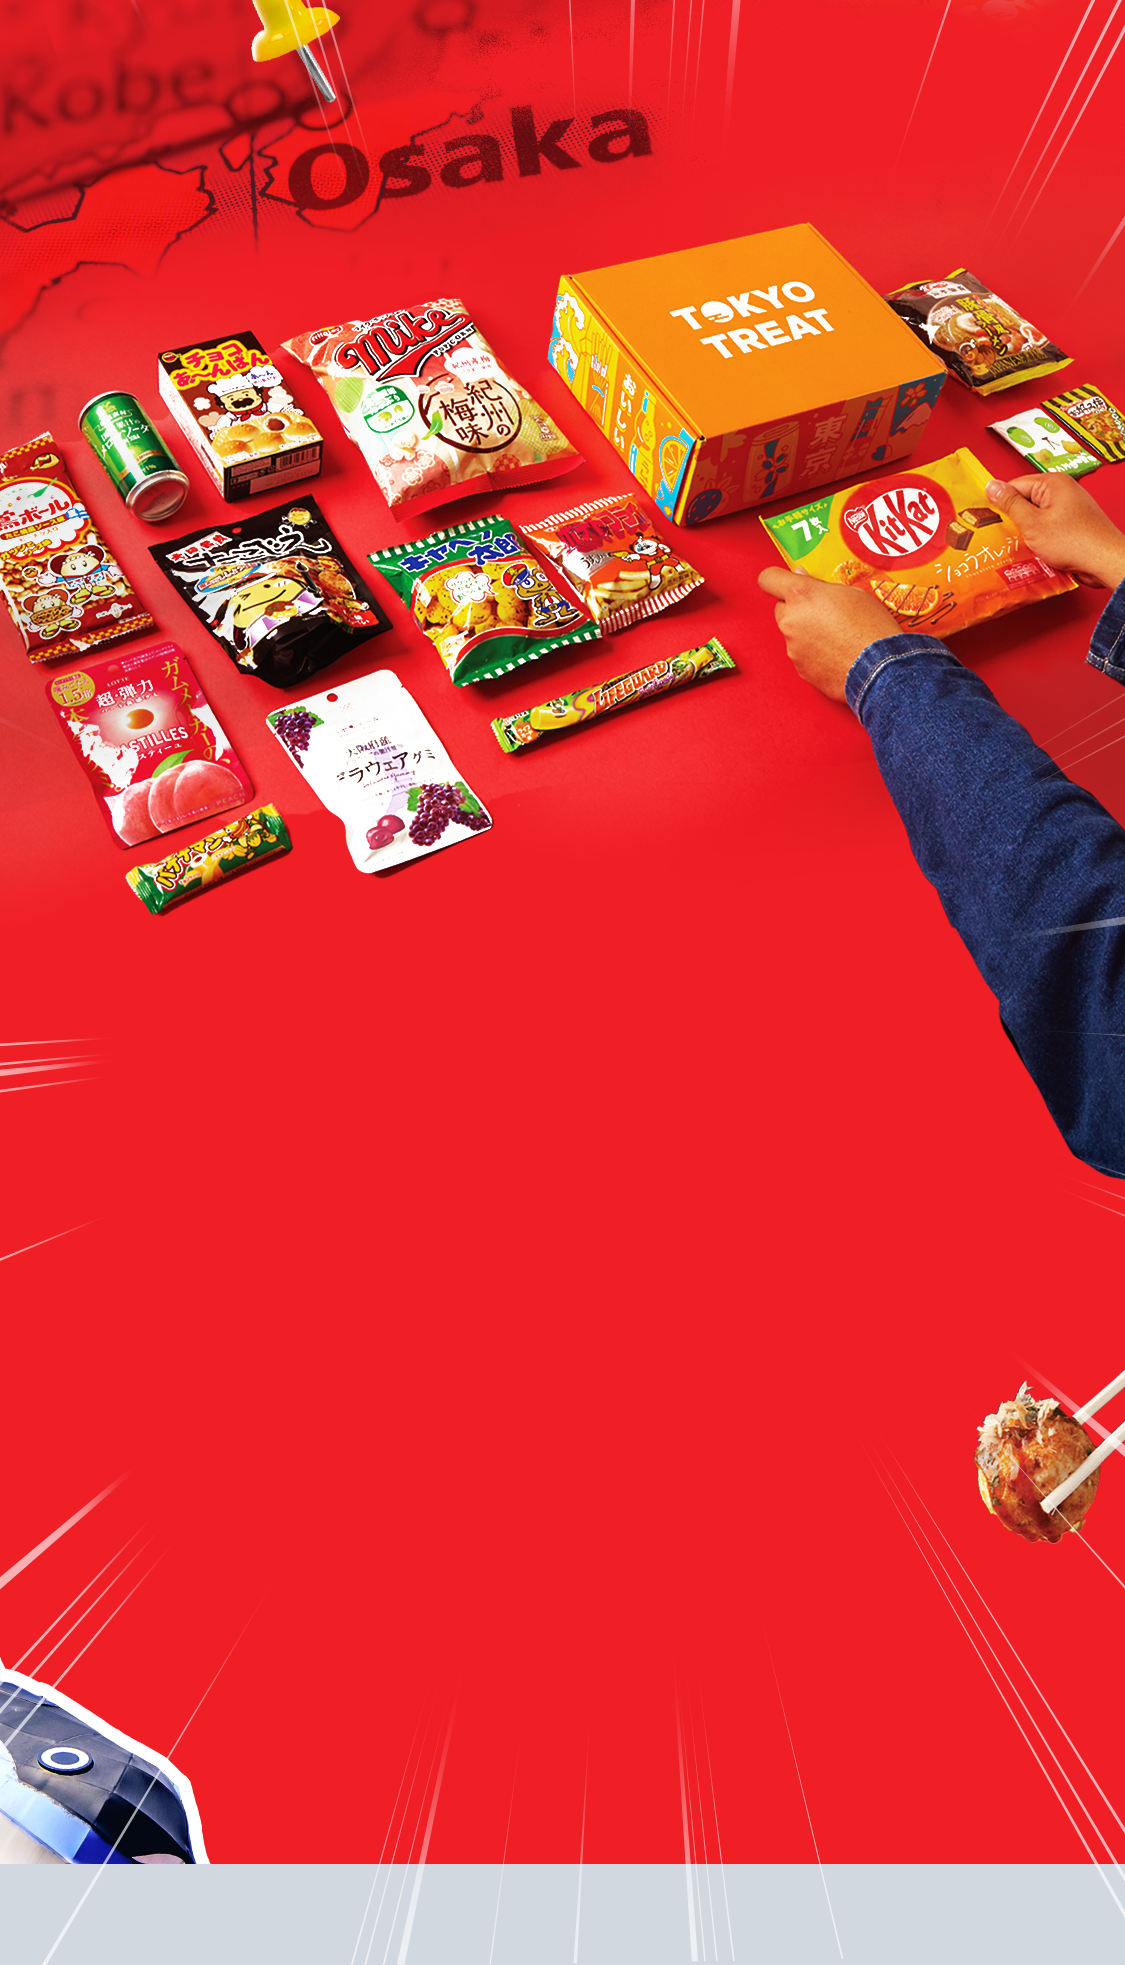 TokyoTreat box sits on a red background, surrounded by box items.